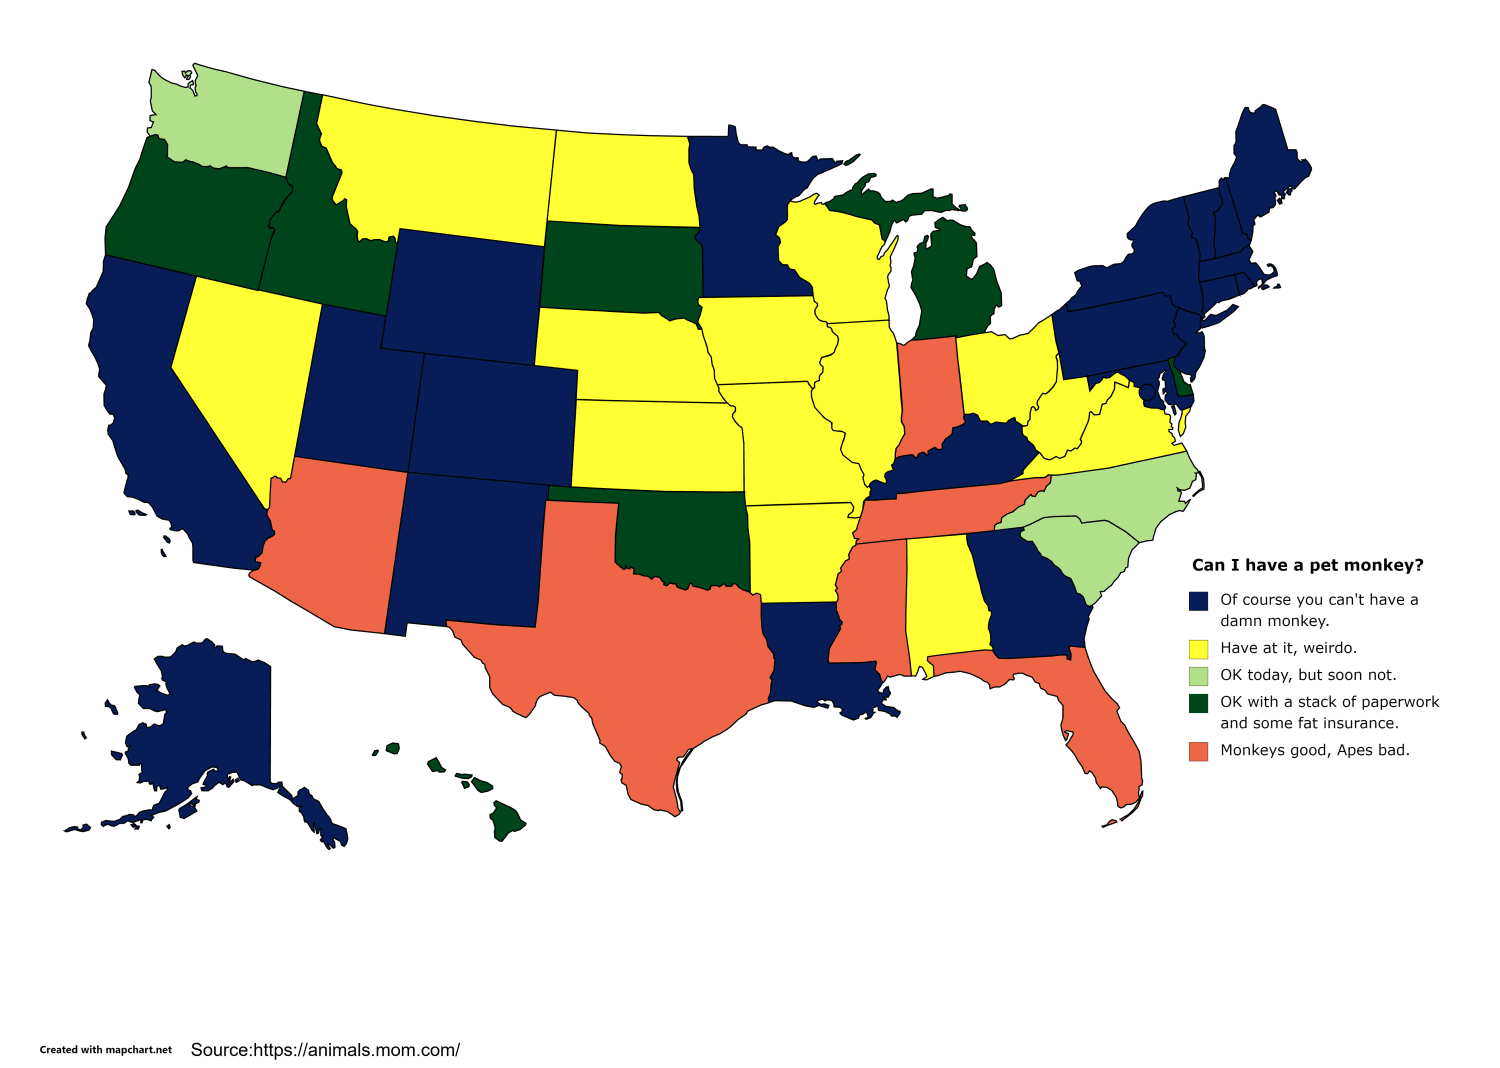 The yellow states in the map below are the states in which it is legal to own a MONKEY.